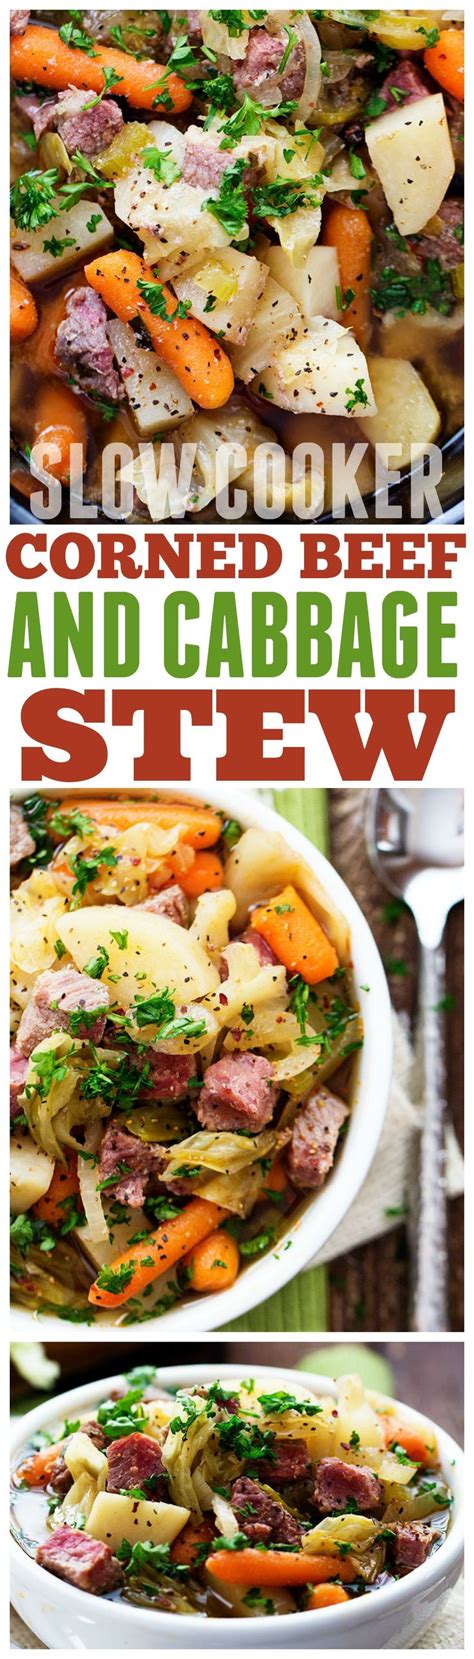 Put the brisket on top of the vegetables and add the beer and pickling spice. This Slow Cooker Corned Beef and Cabbage Stew is hearty ...